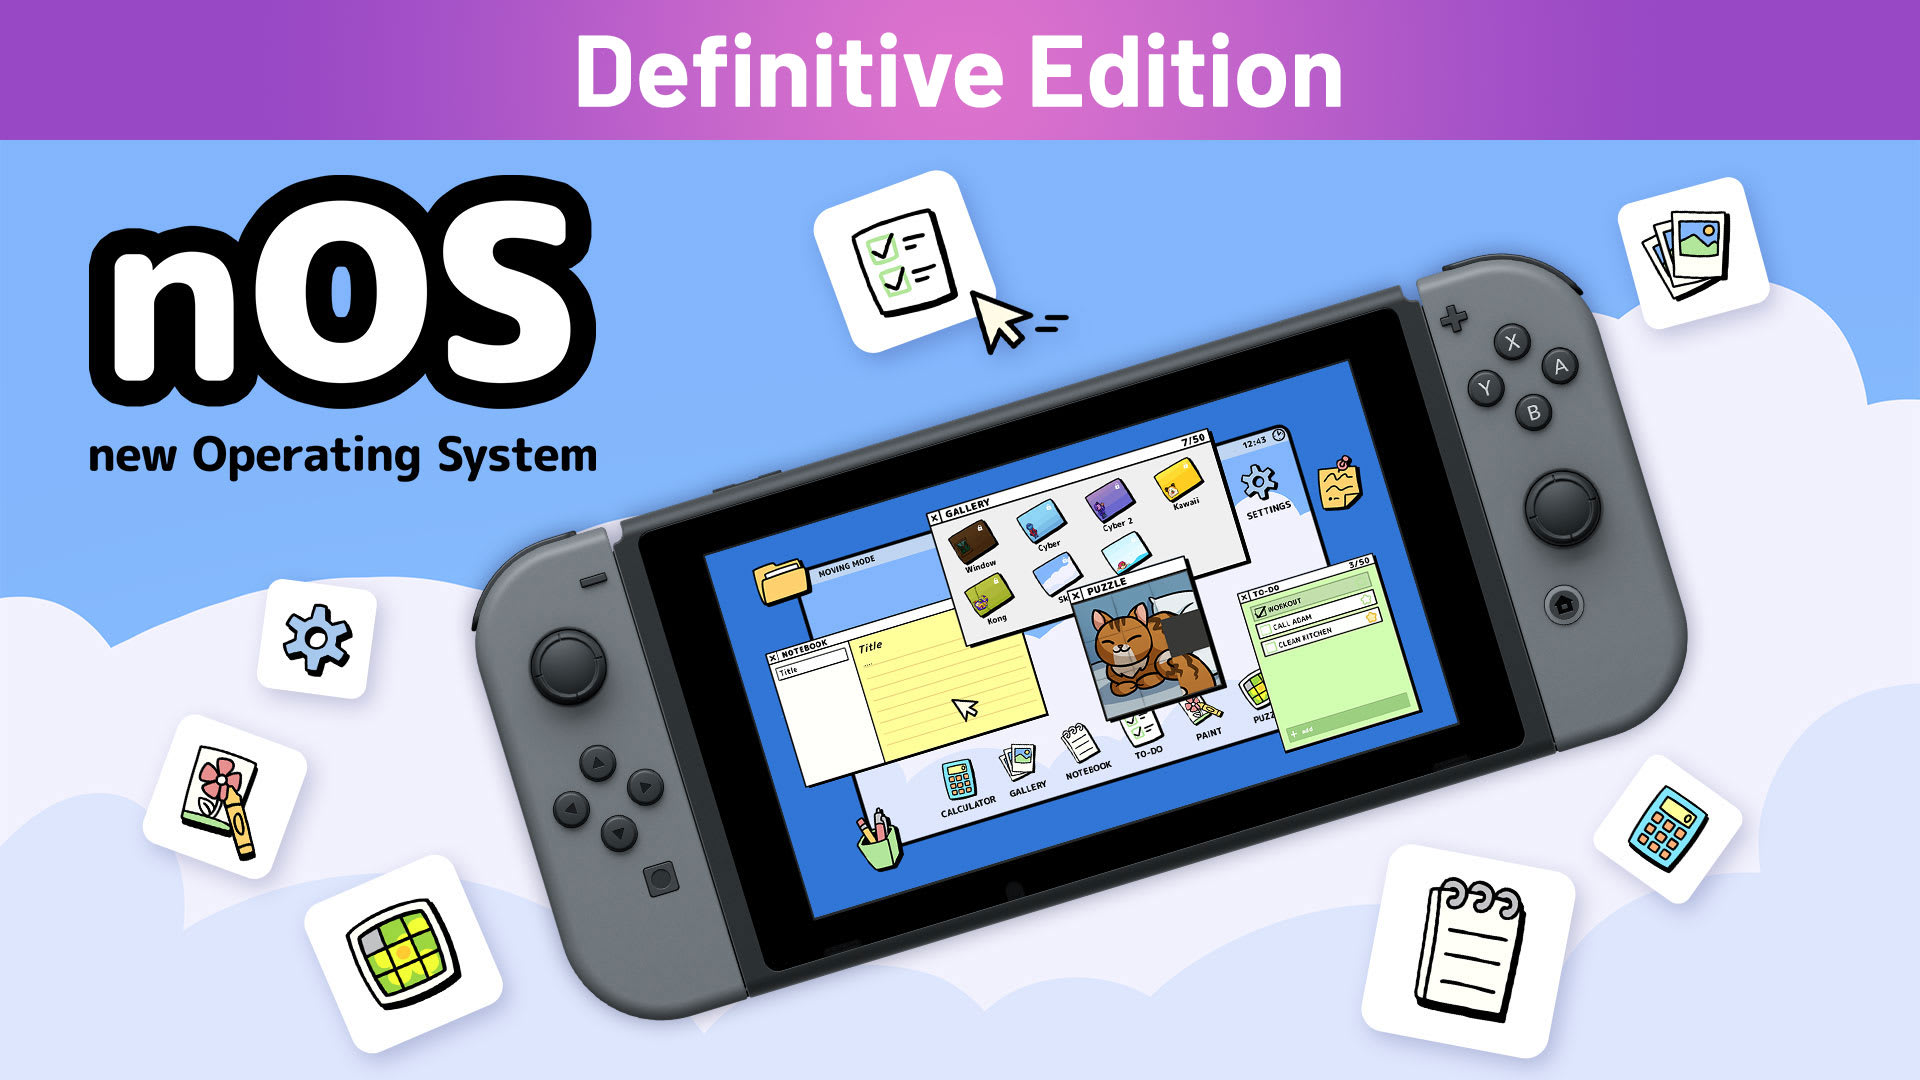 nOS new Operating System Definitive Edition